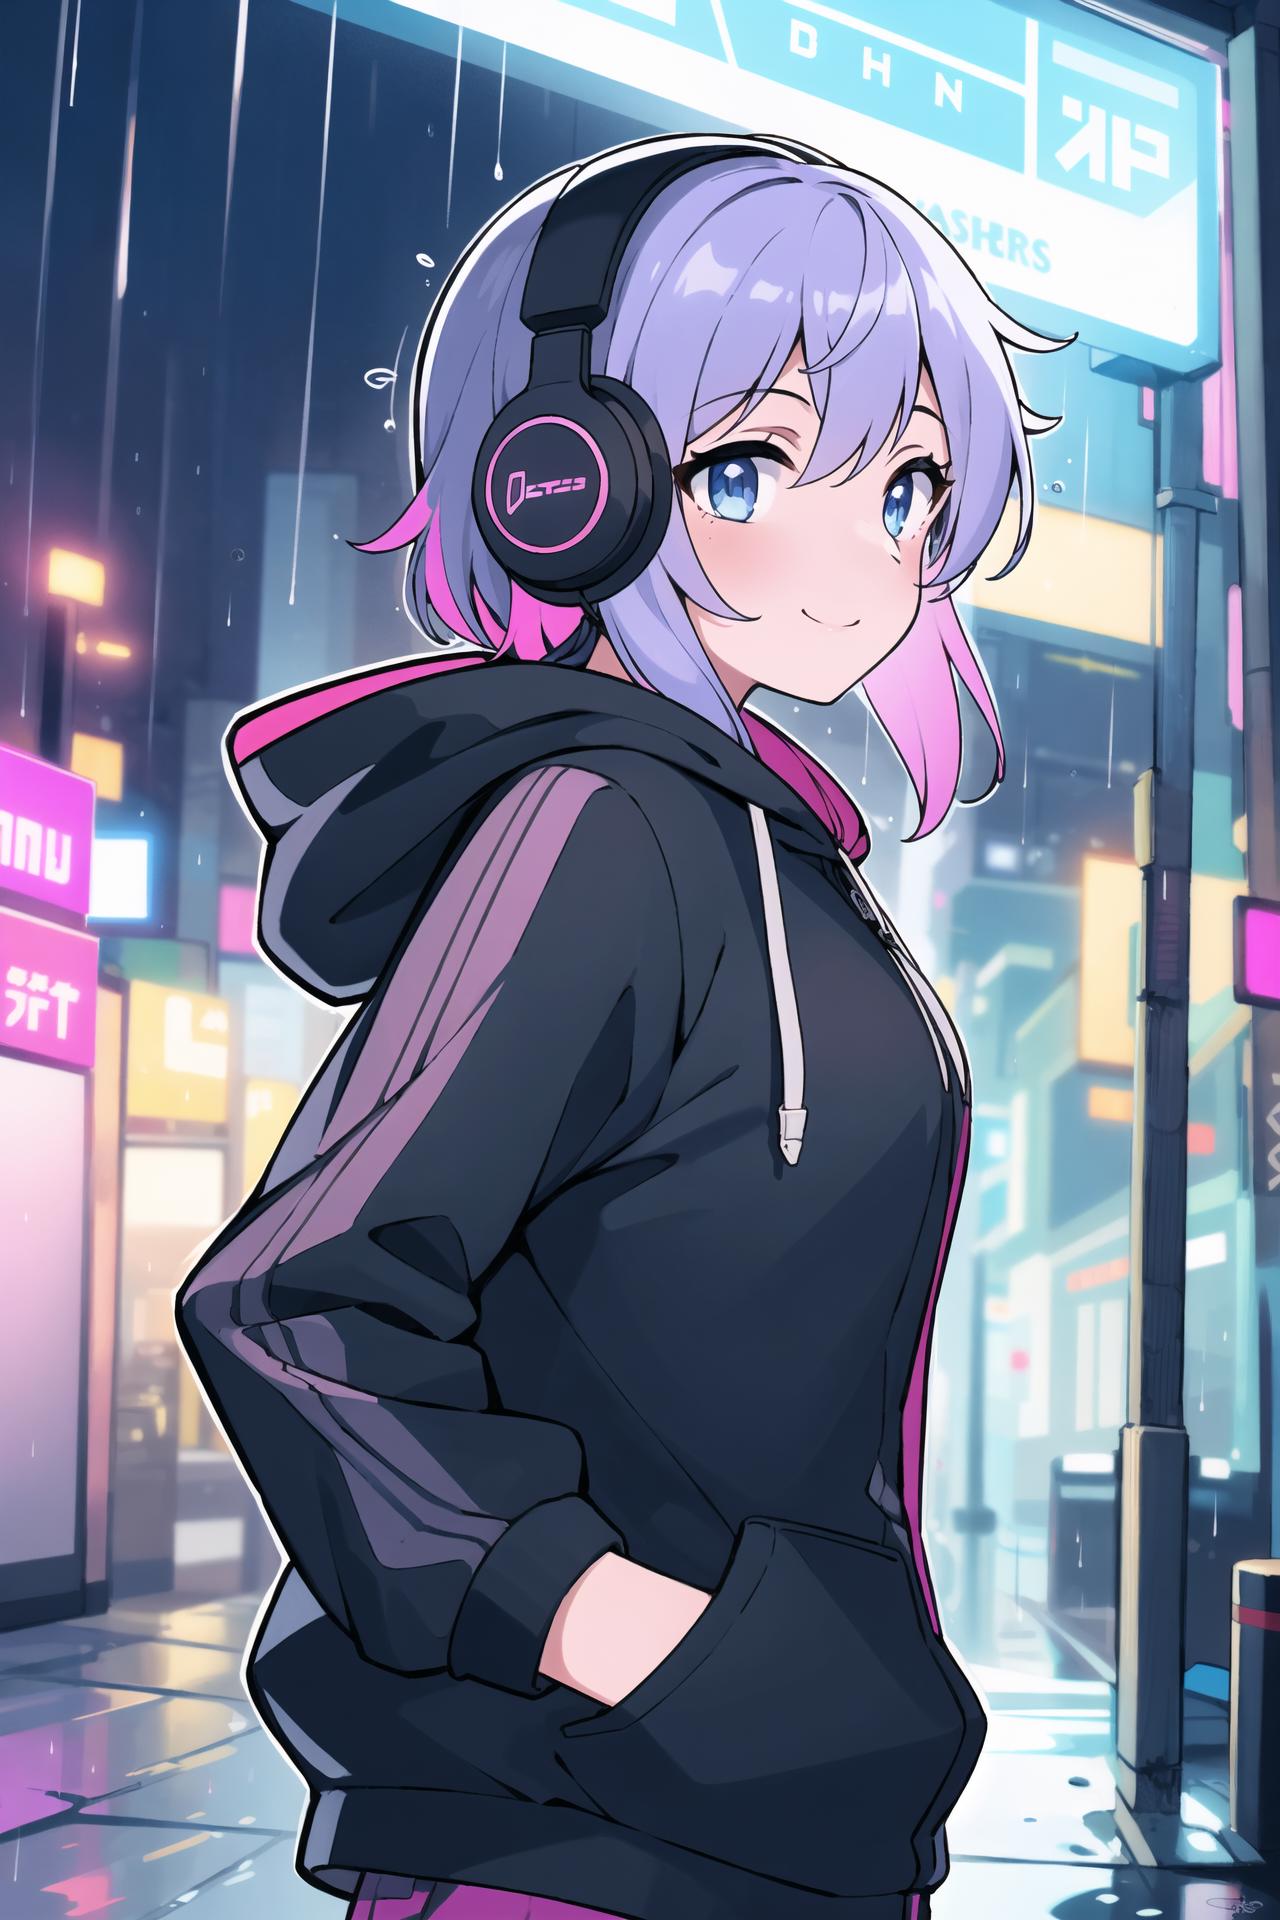 A woman wearing a hoodie with headphones and a smile.